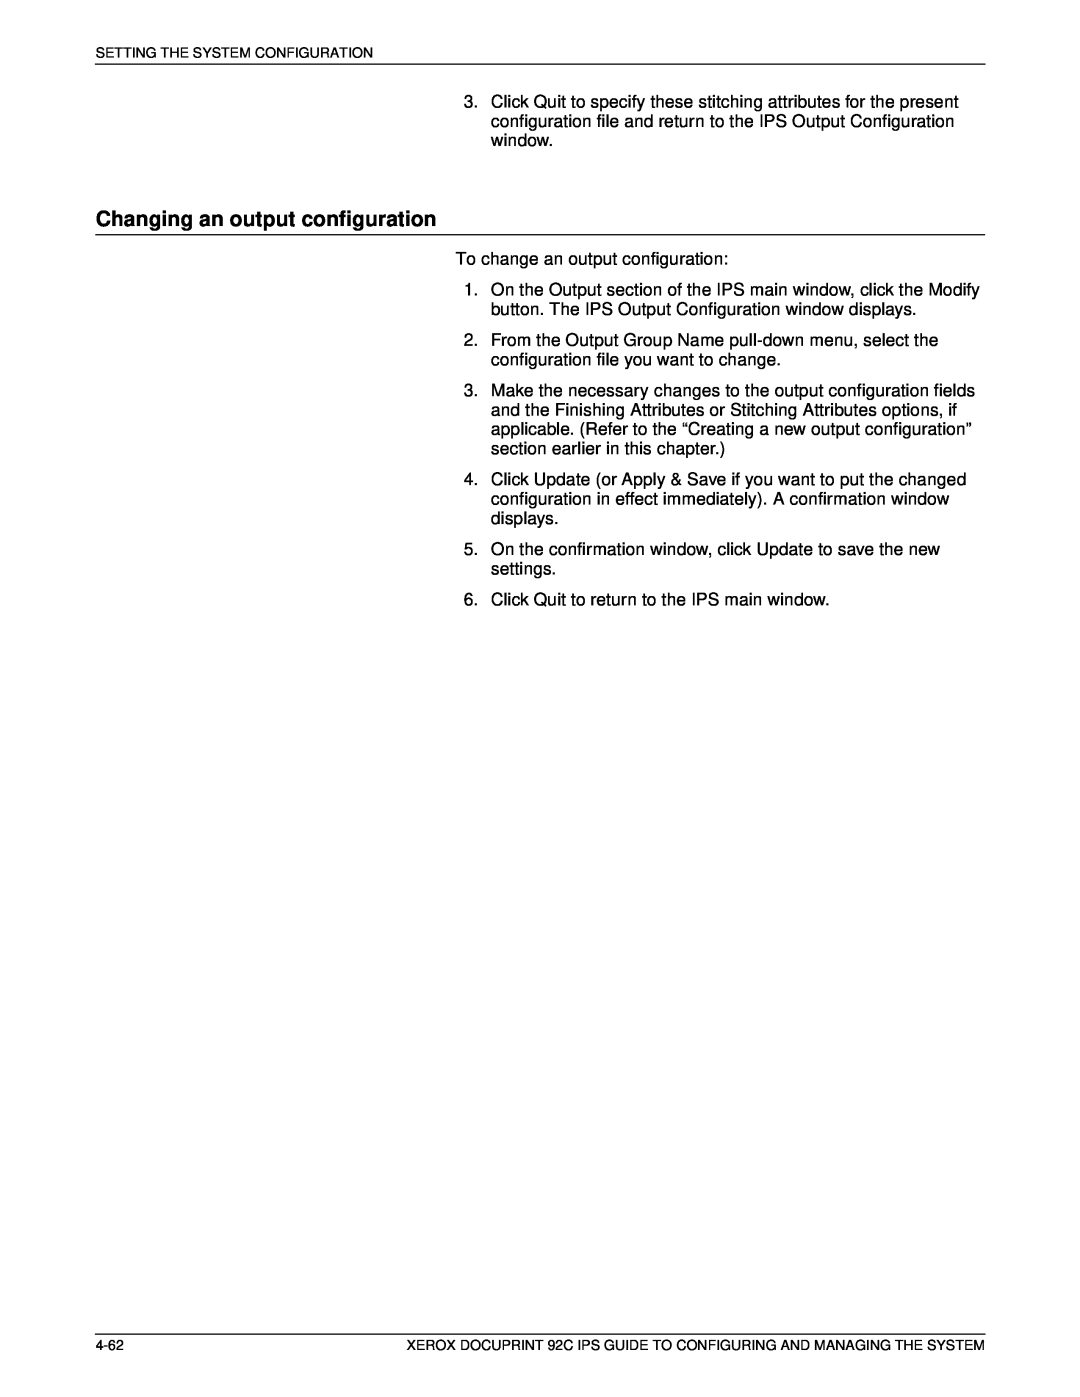 Xerox 92C IPS manual Changing an output configuration 